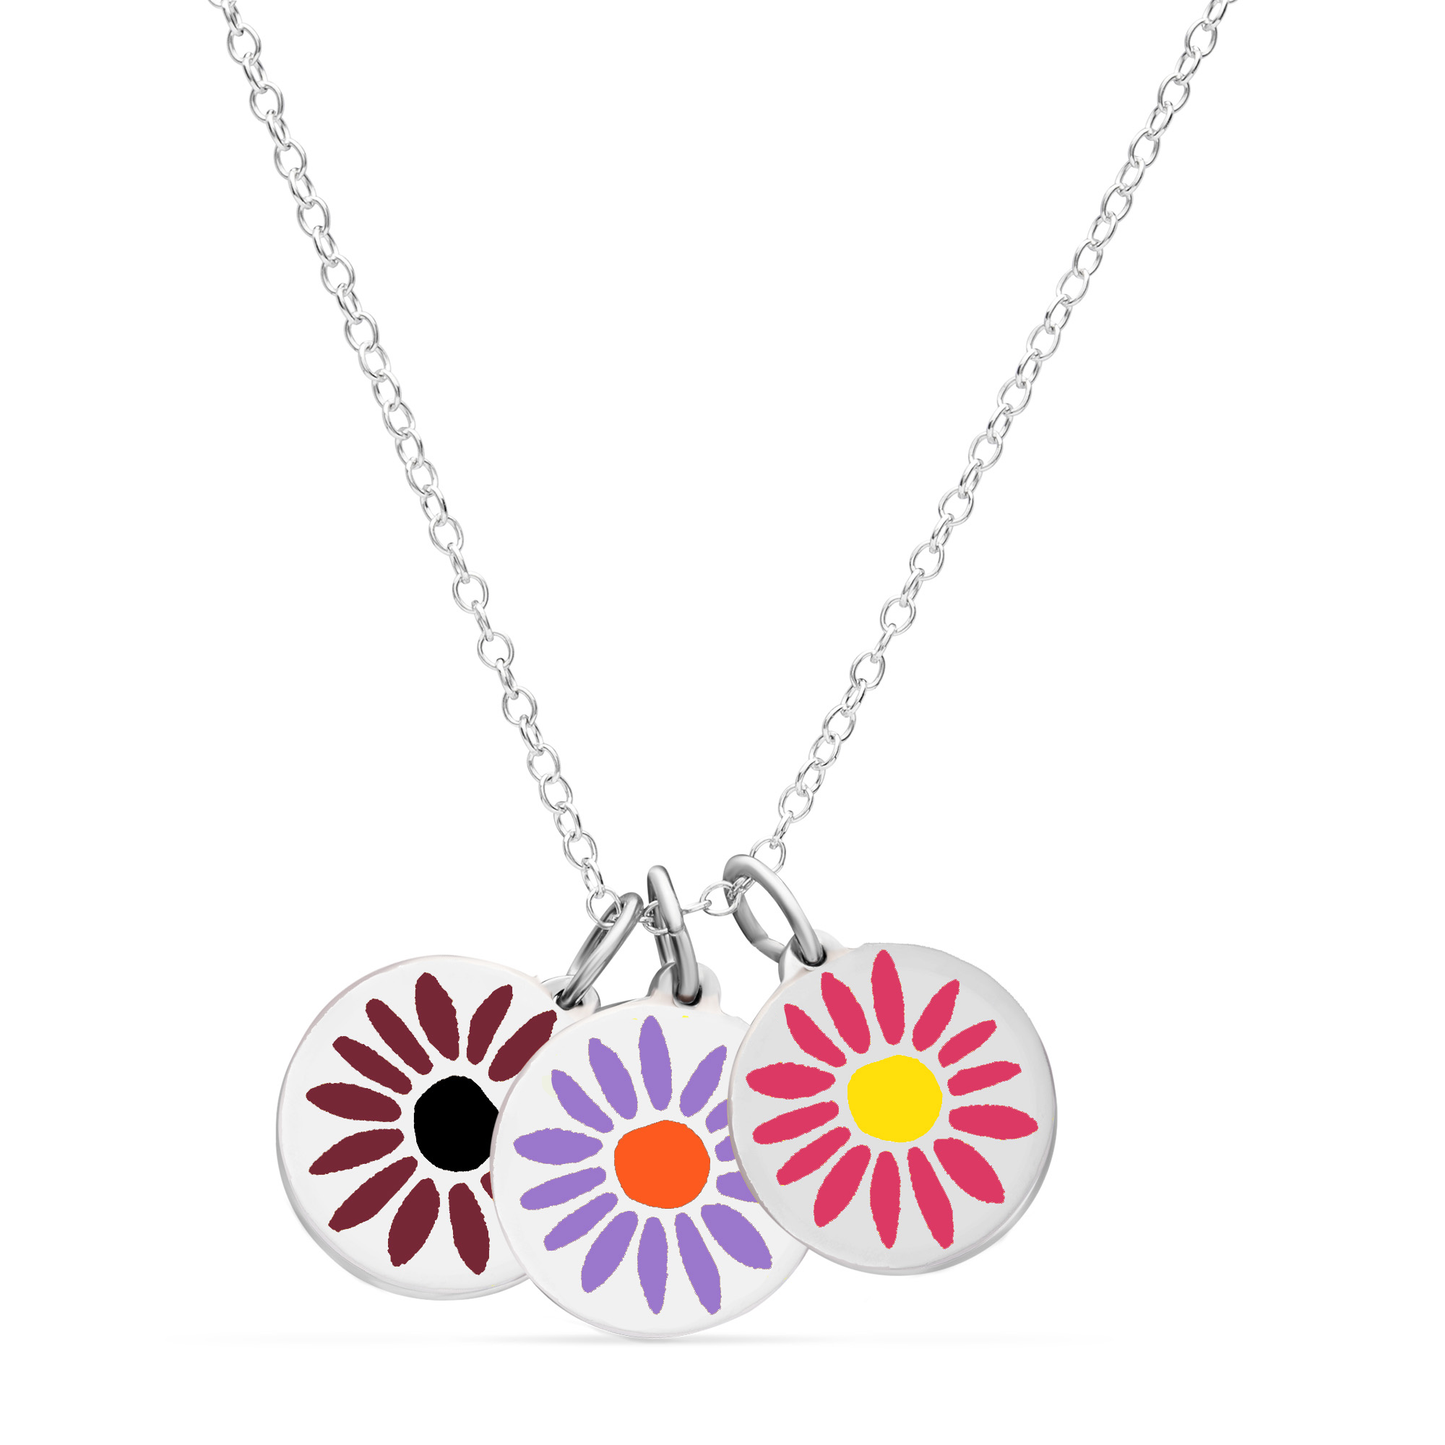 NEW BOUQUET NECKLACE sterling silver with rhodium plate